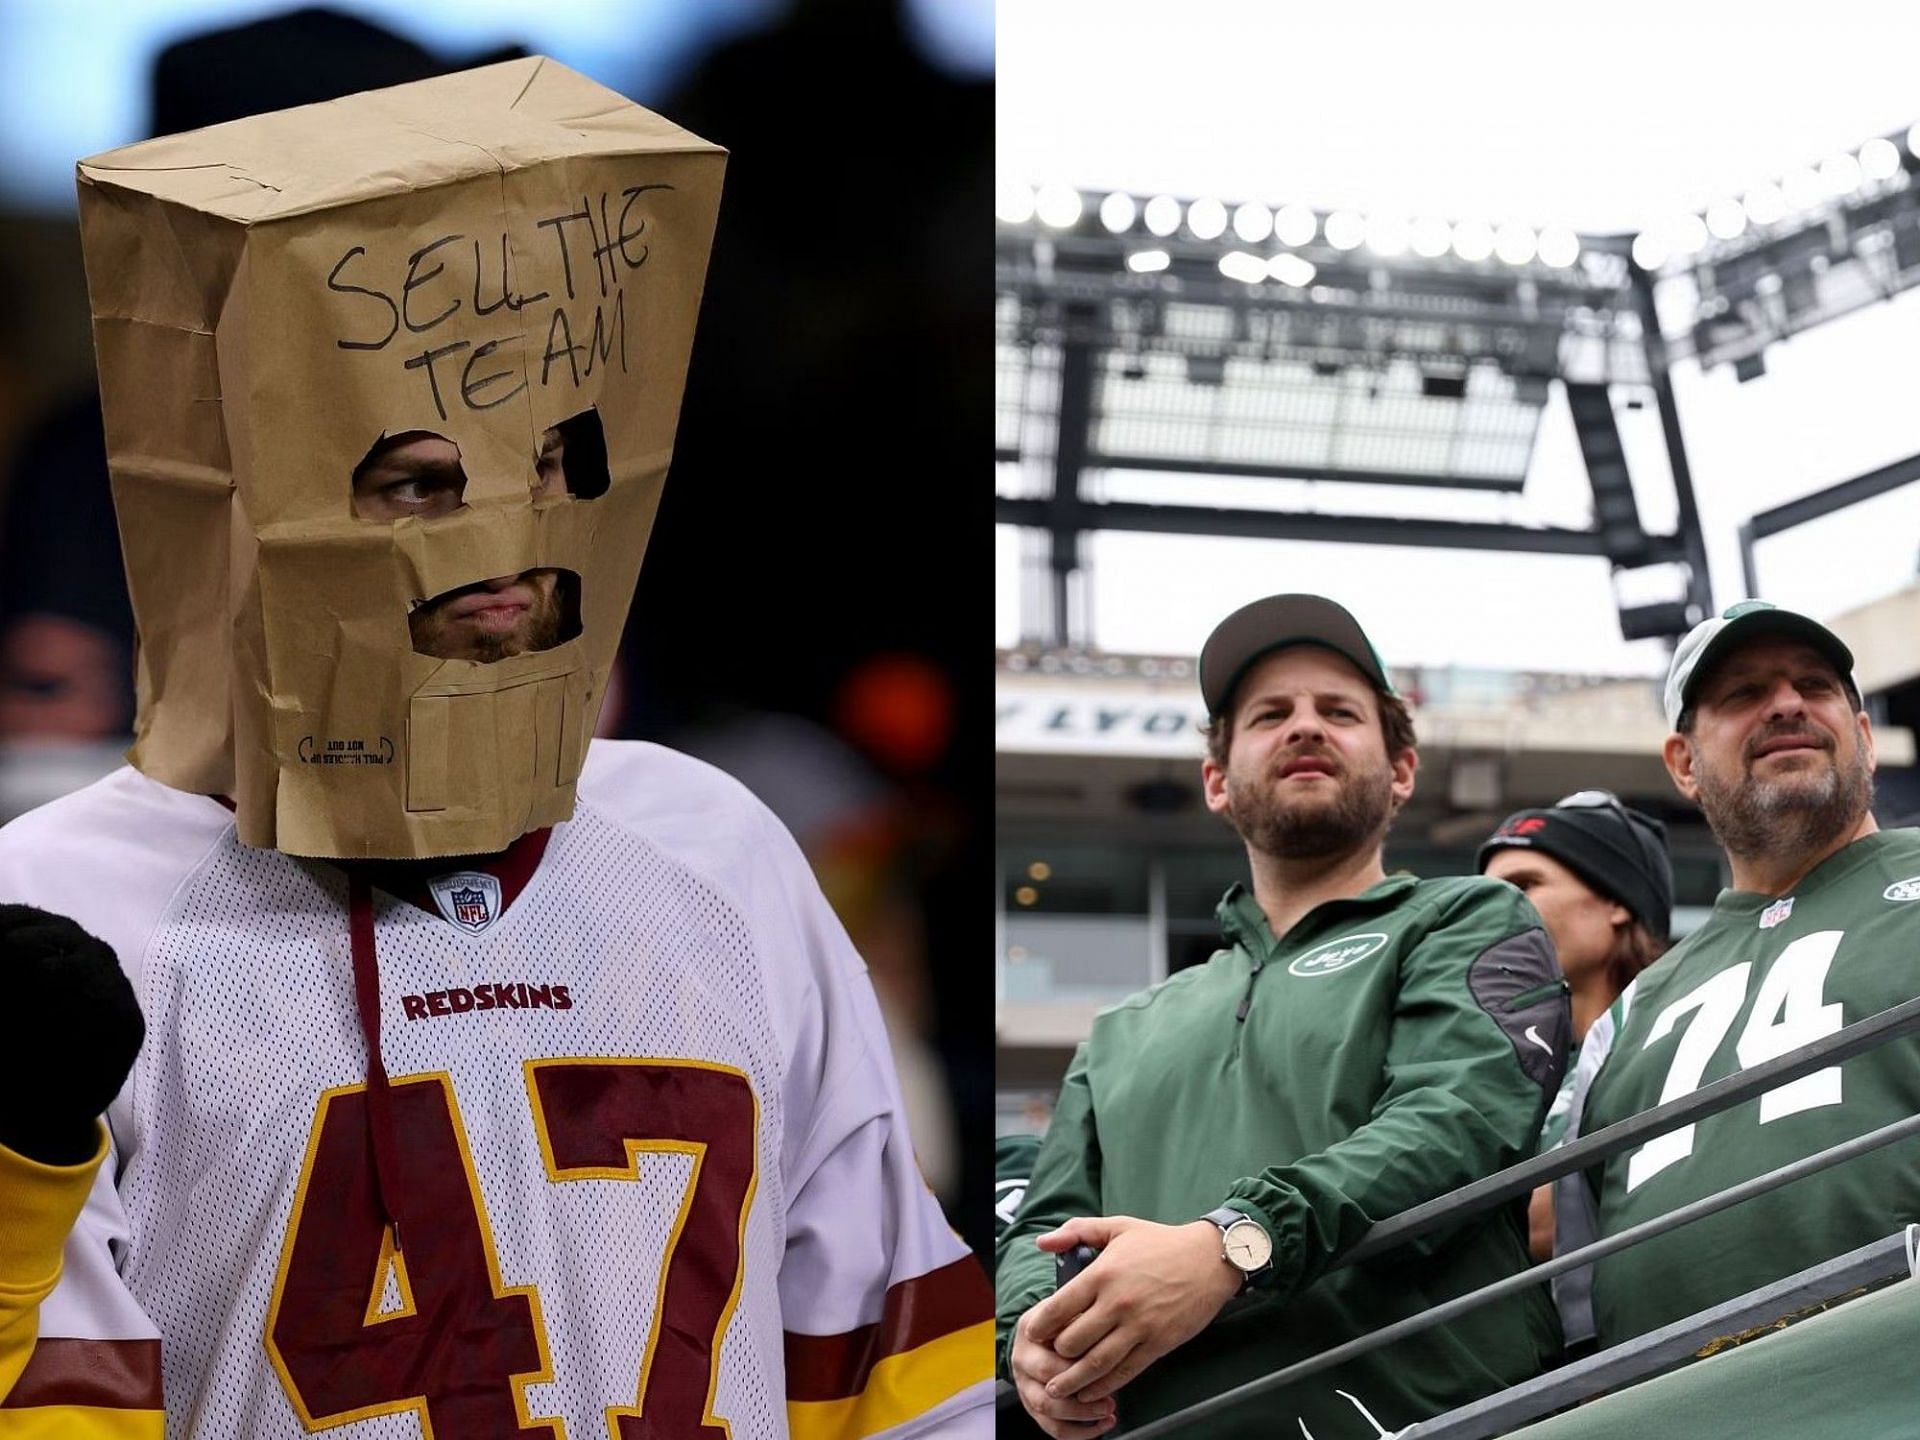 New York Jets and Washington Commanders fans look on as team struggles for another year